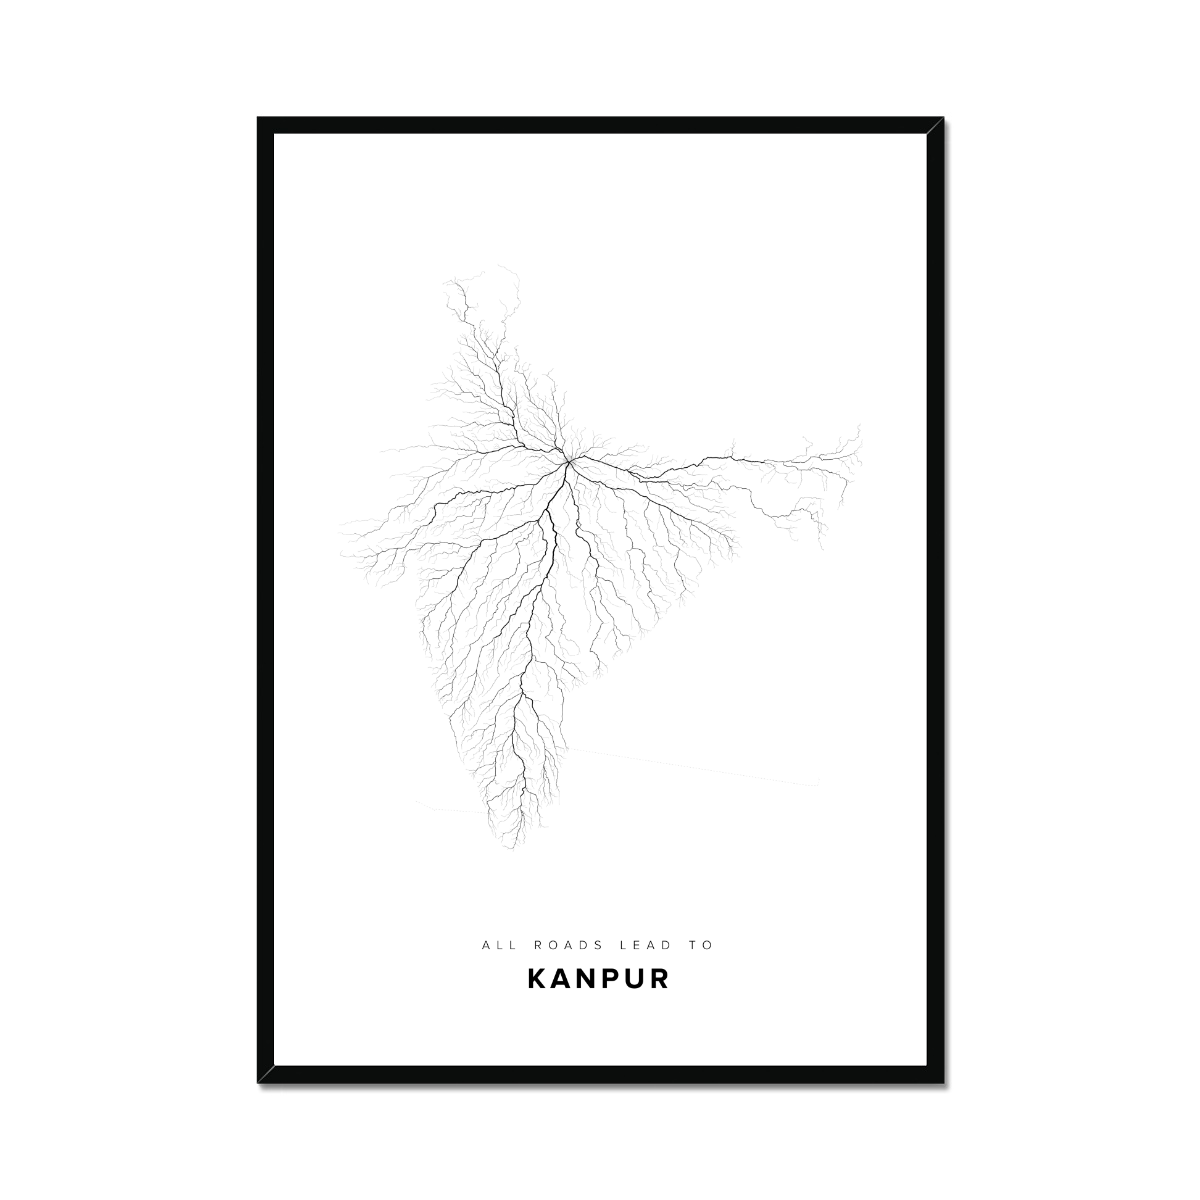 All roads lead to Kanpur (India) Fine Art Map Print